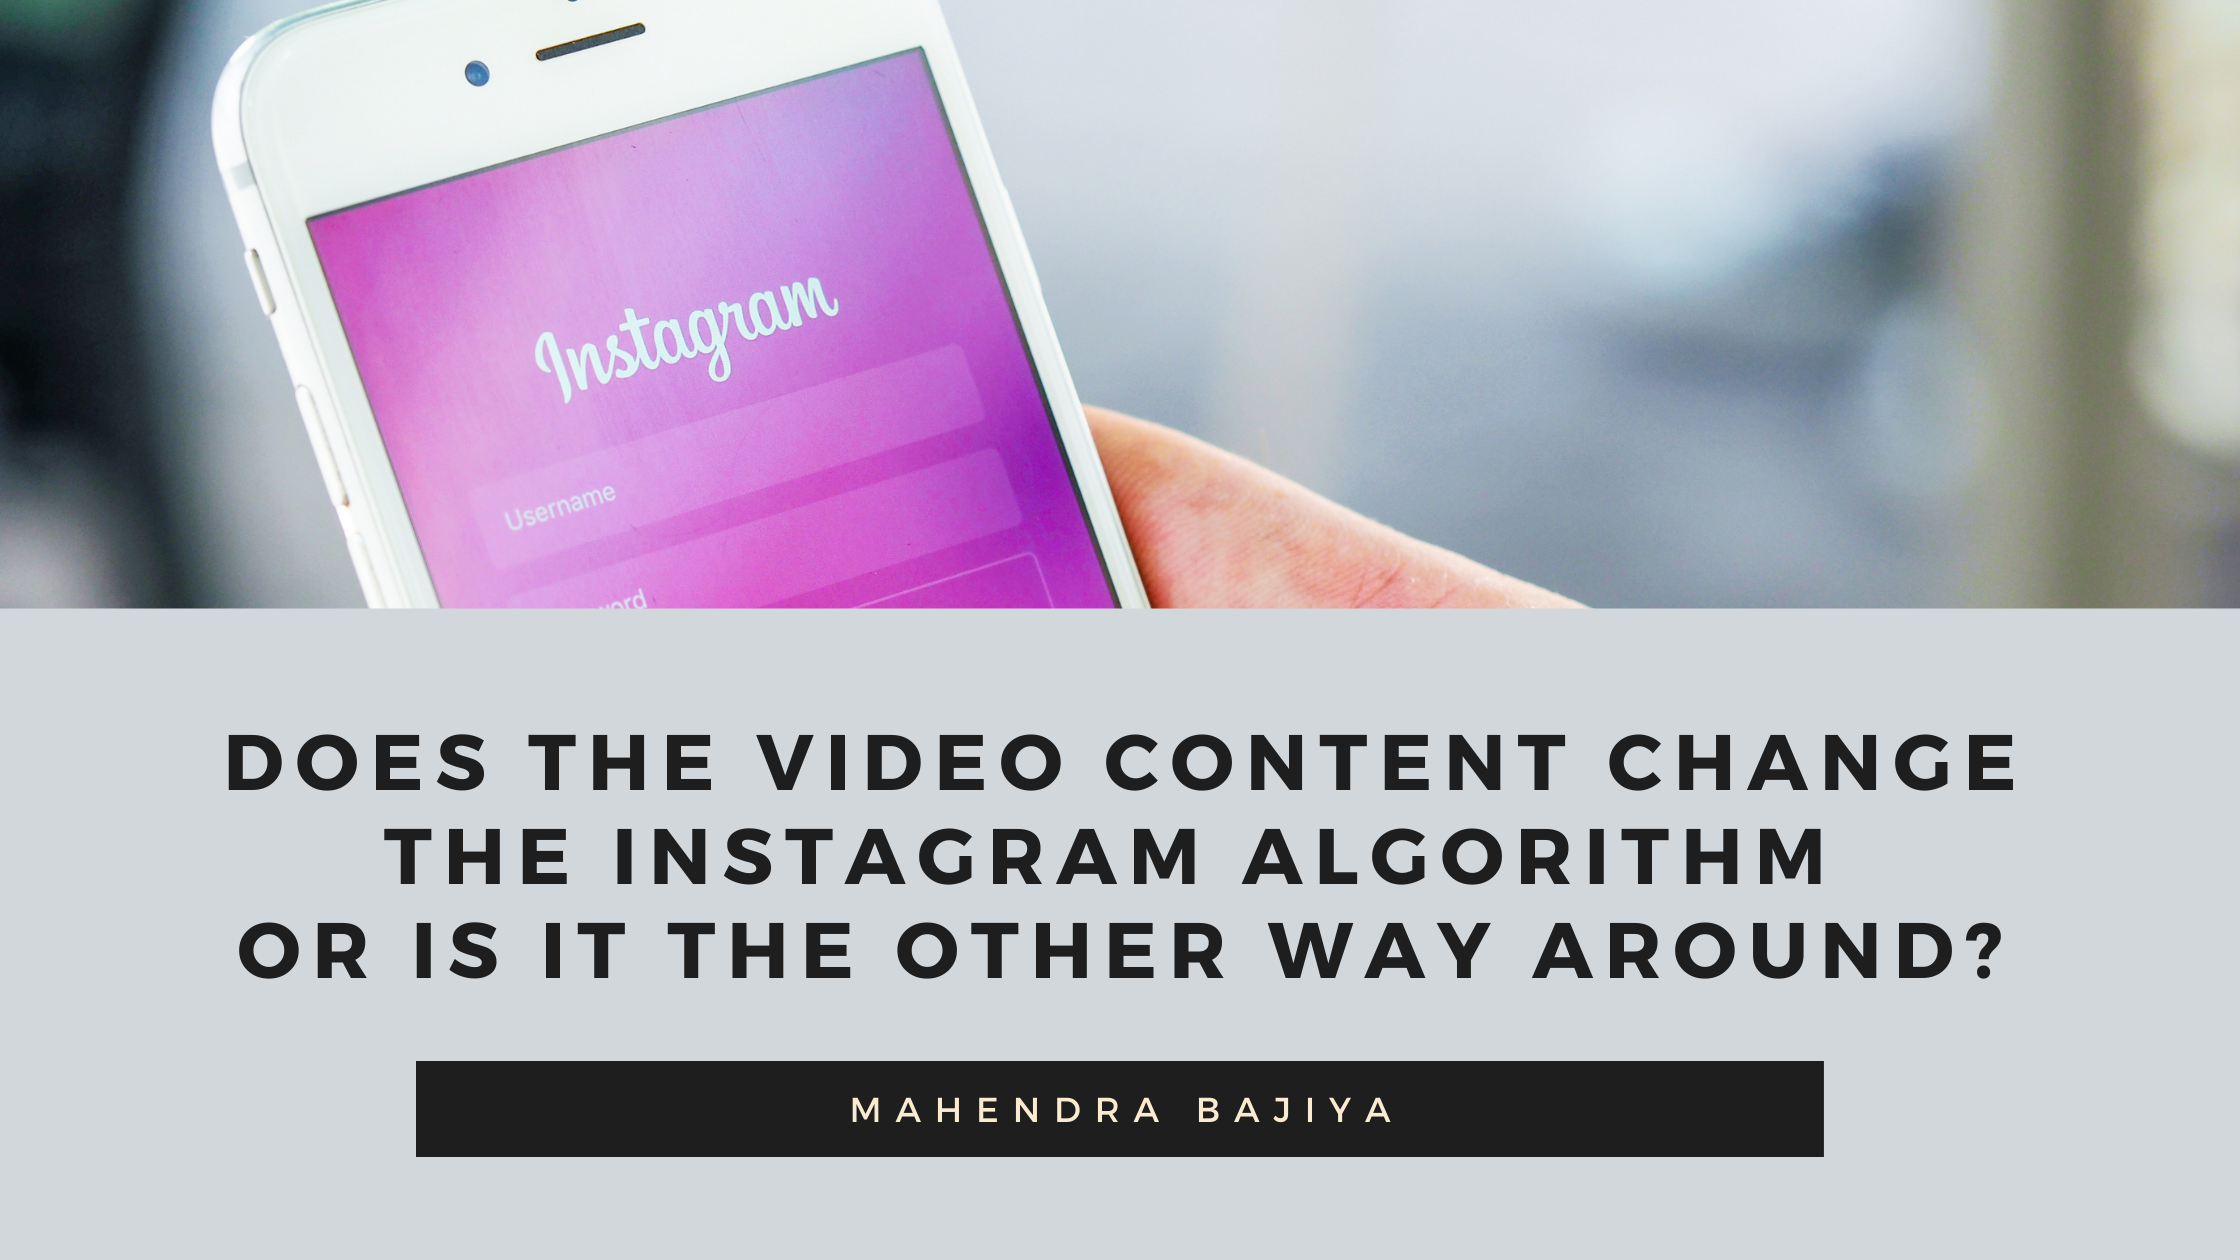 Does the Video Content Change the Instagram Algorithm or Is It the Other Way Around?